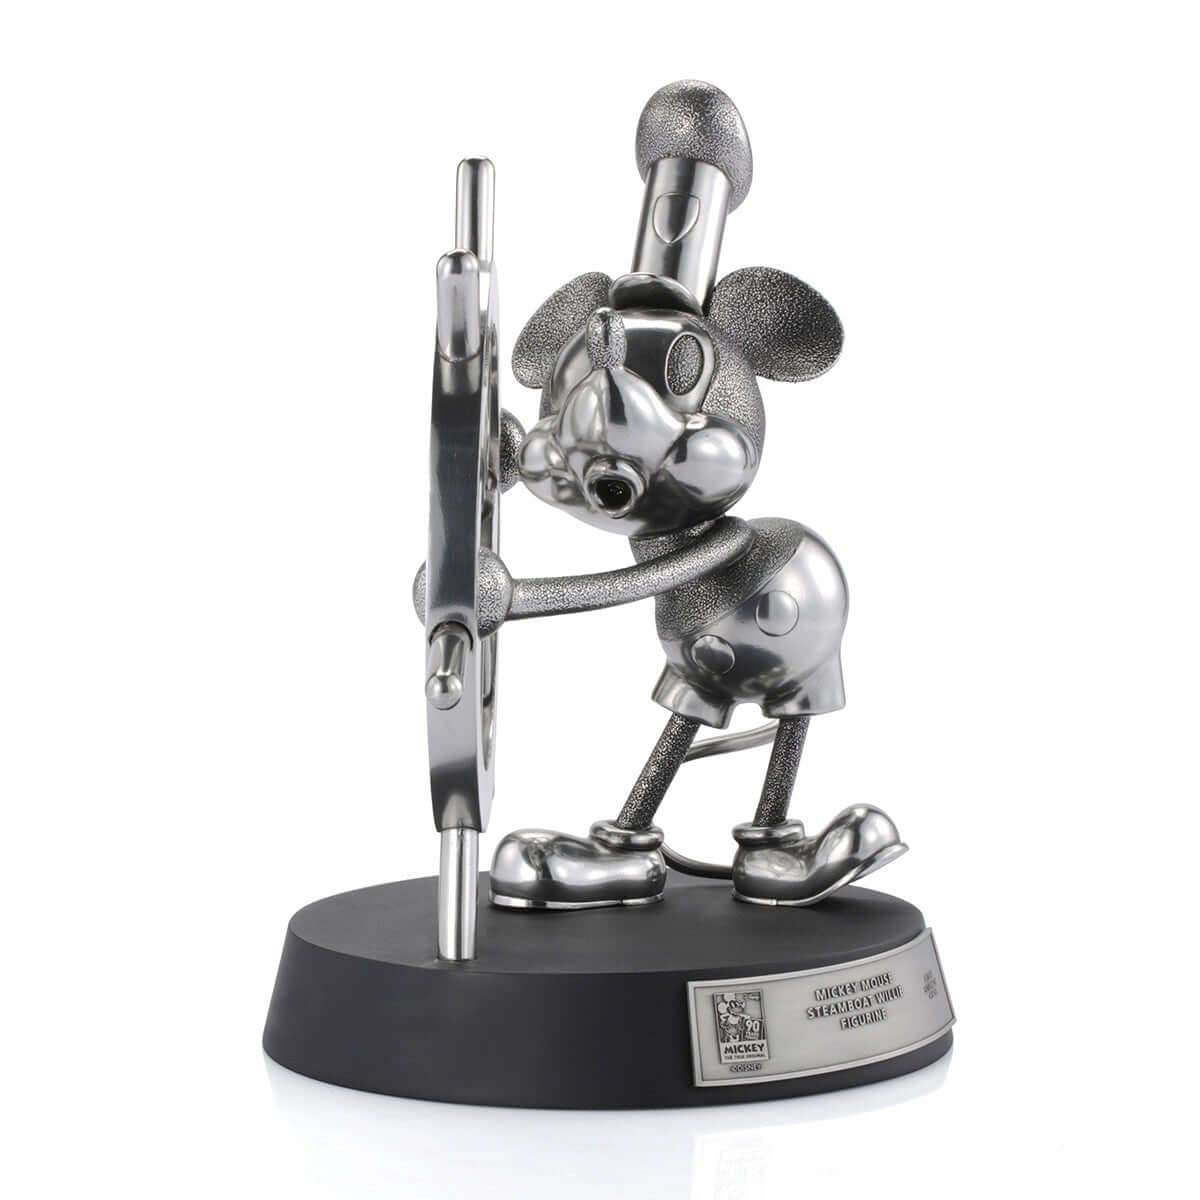 Mickey Mouse Limited Edition Steamboat Willie Statue - Disney Gift